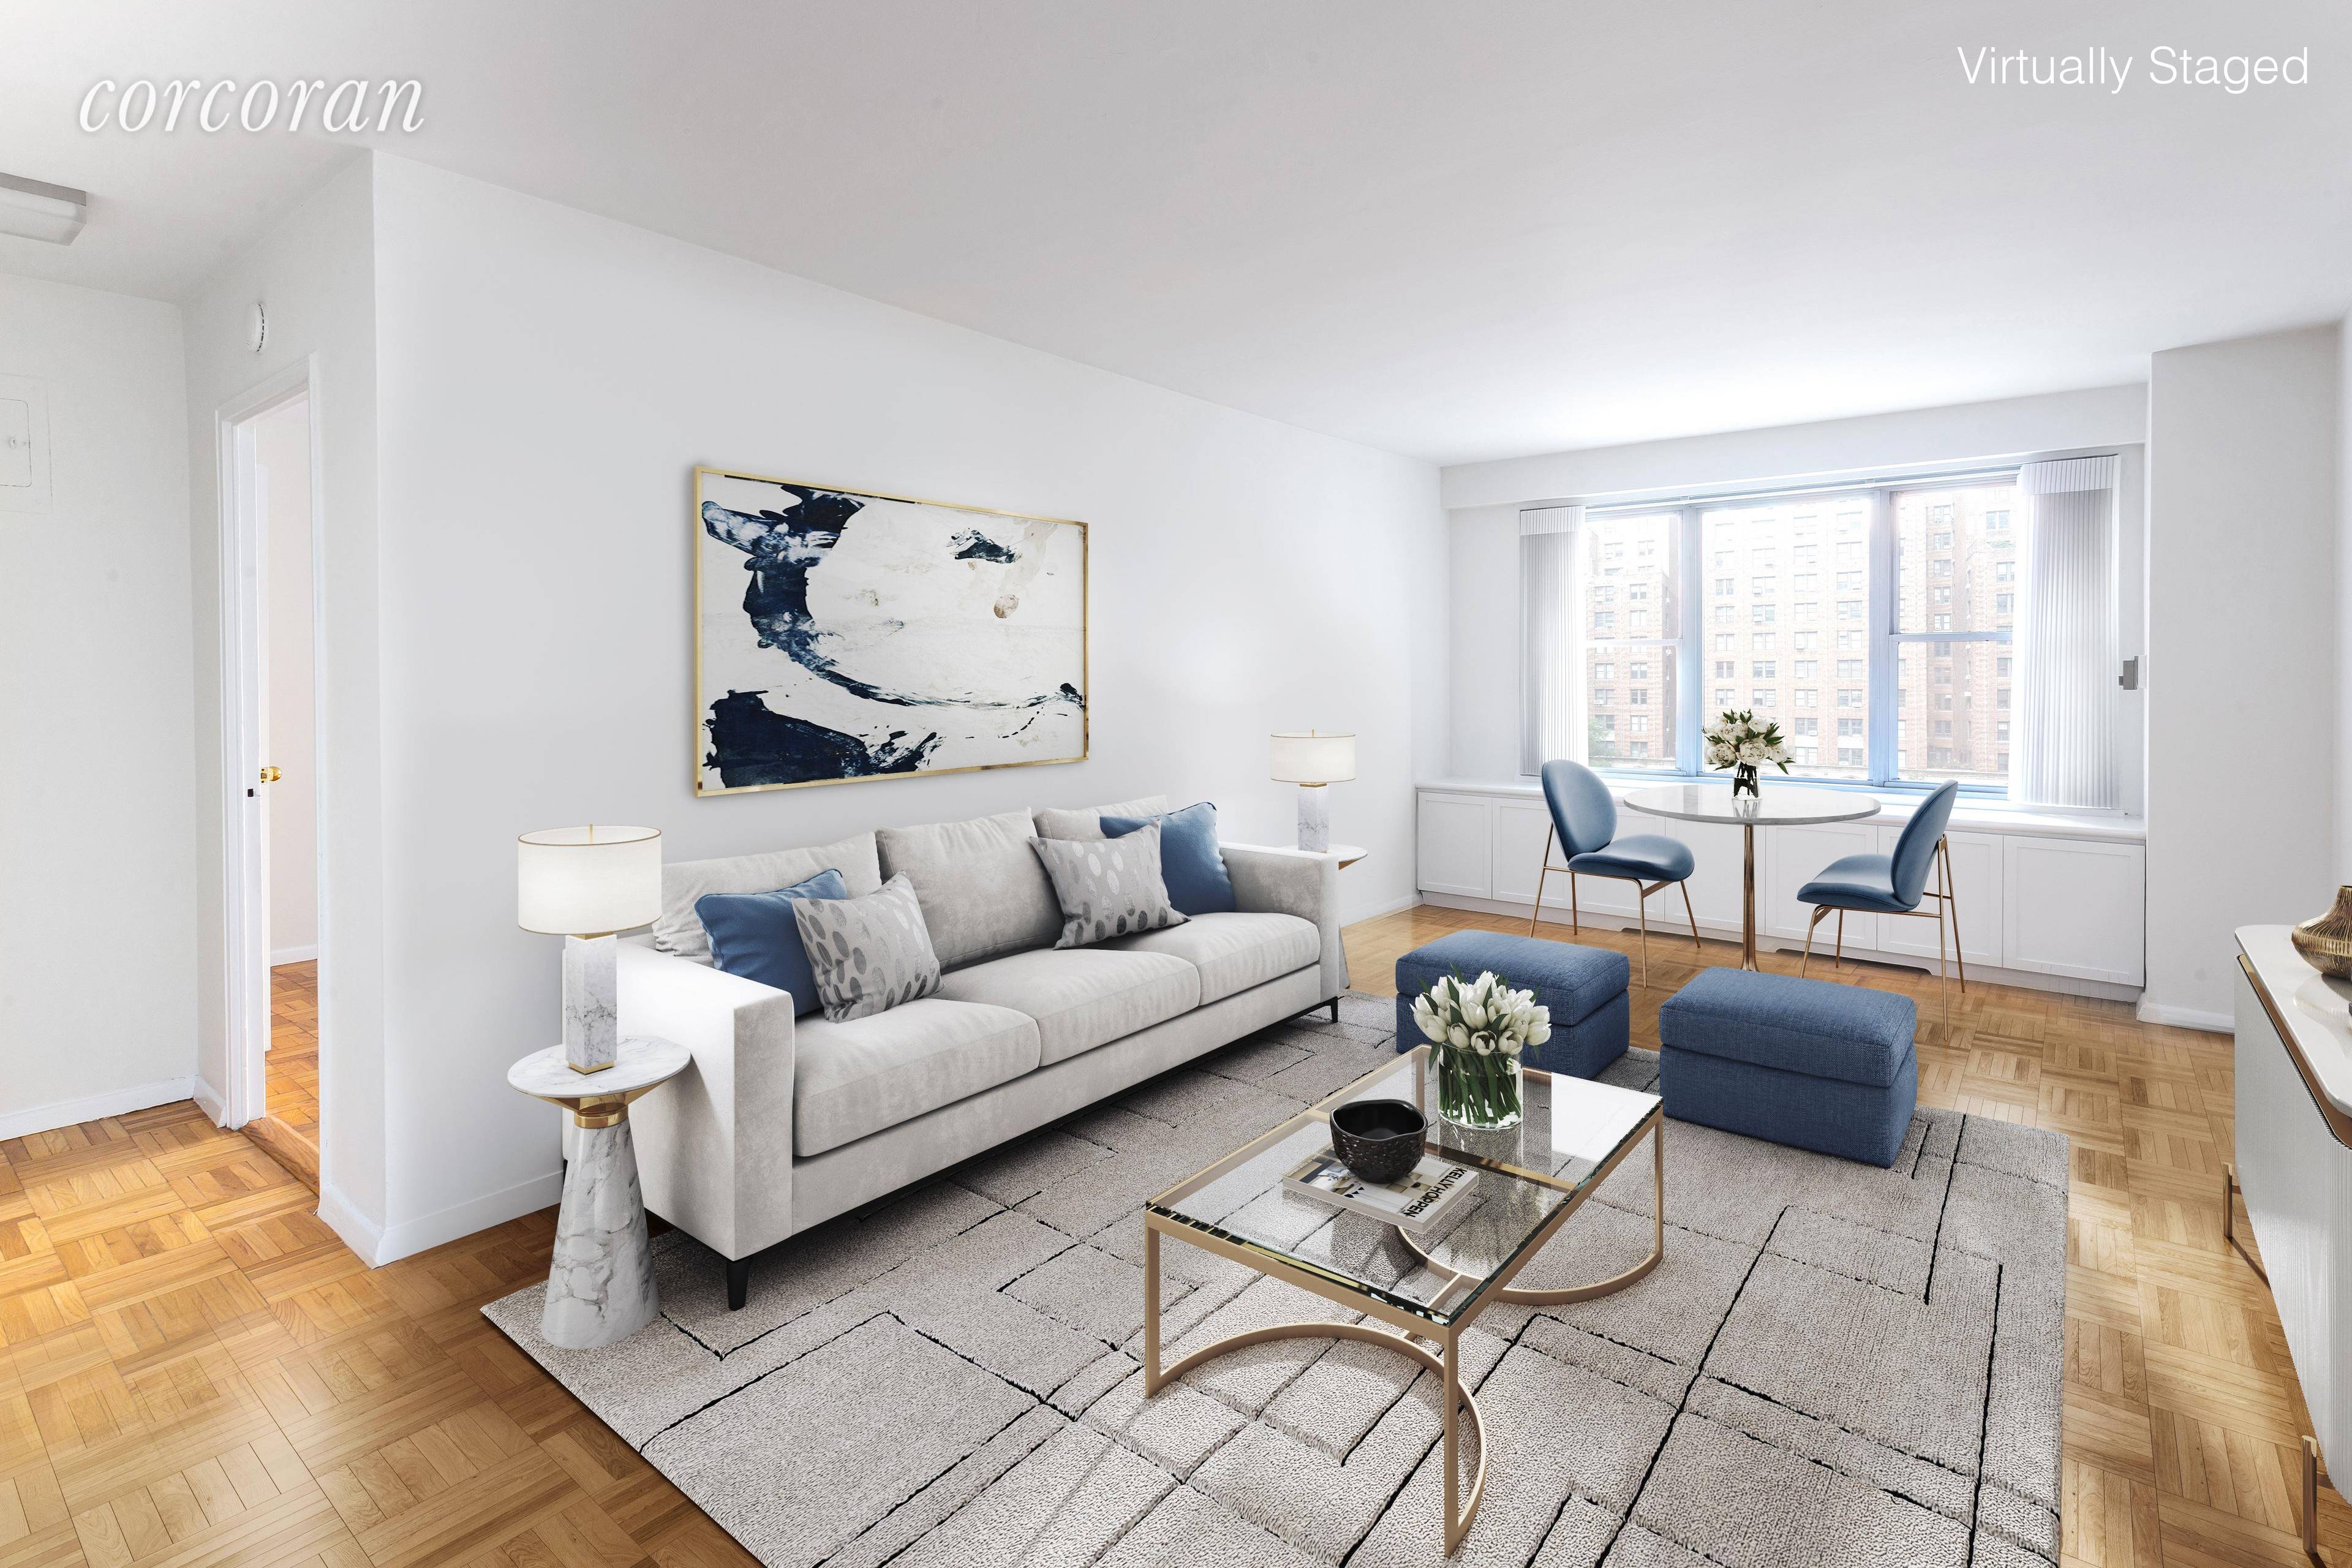 Enjoying a privileged location within Mayfair Towers, this highly desirable one bedroom home promises a peaceful existence and a flexible layout.